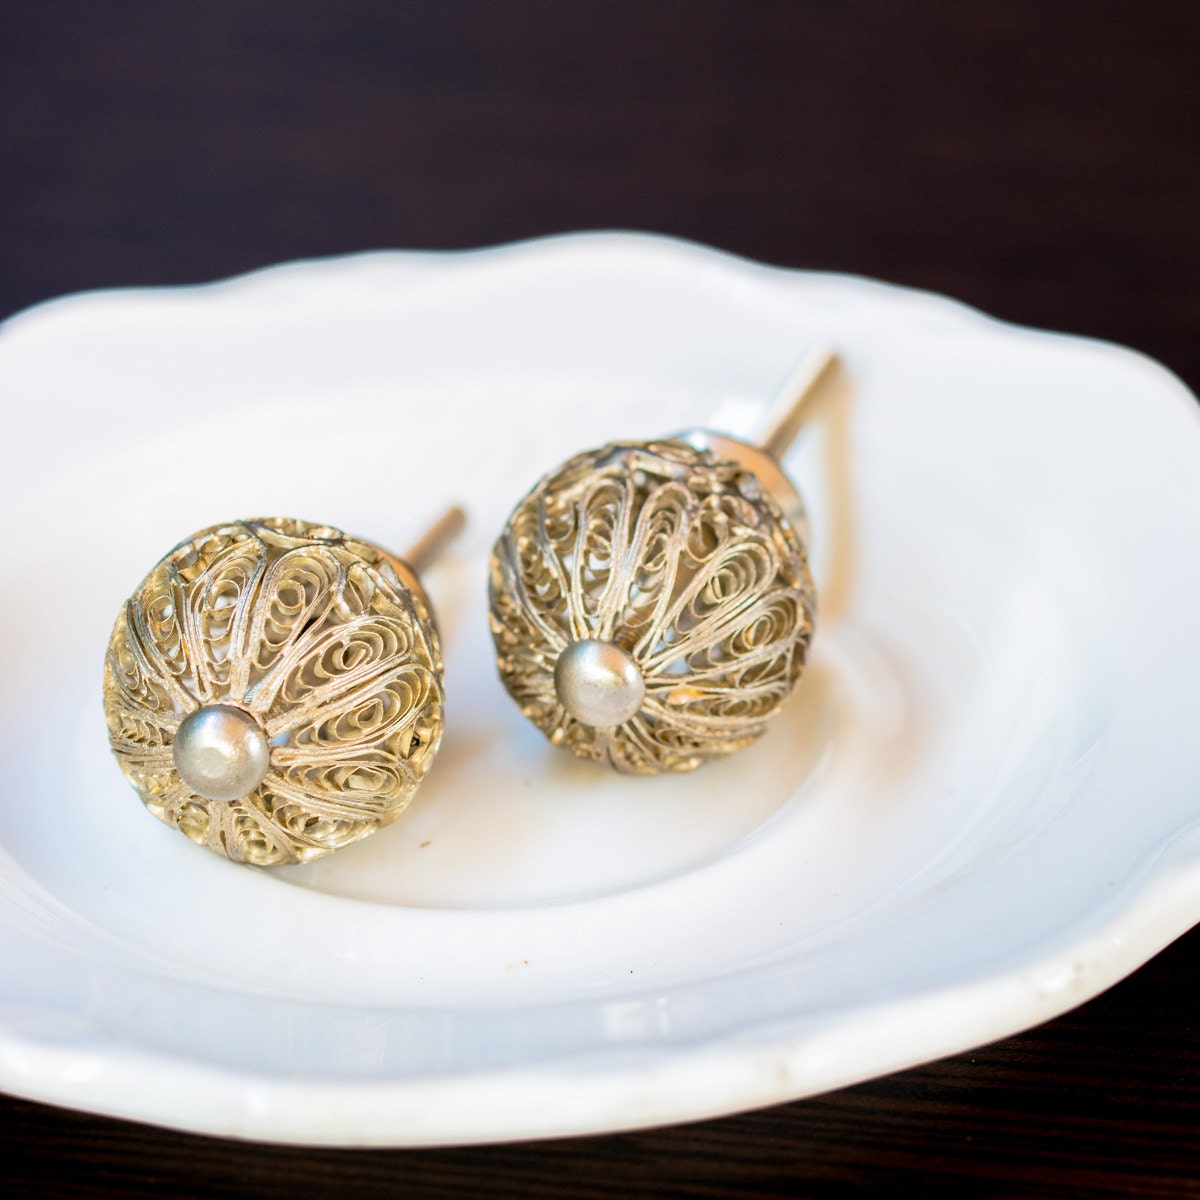 A pair of delicate filigree drawer/ cabinet knob/ pull